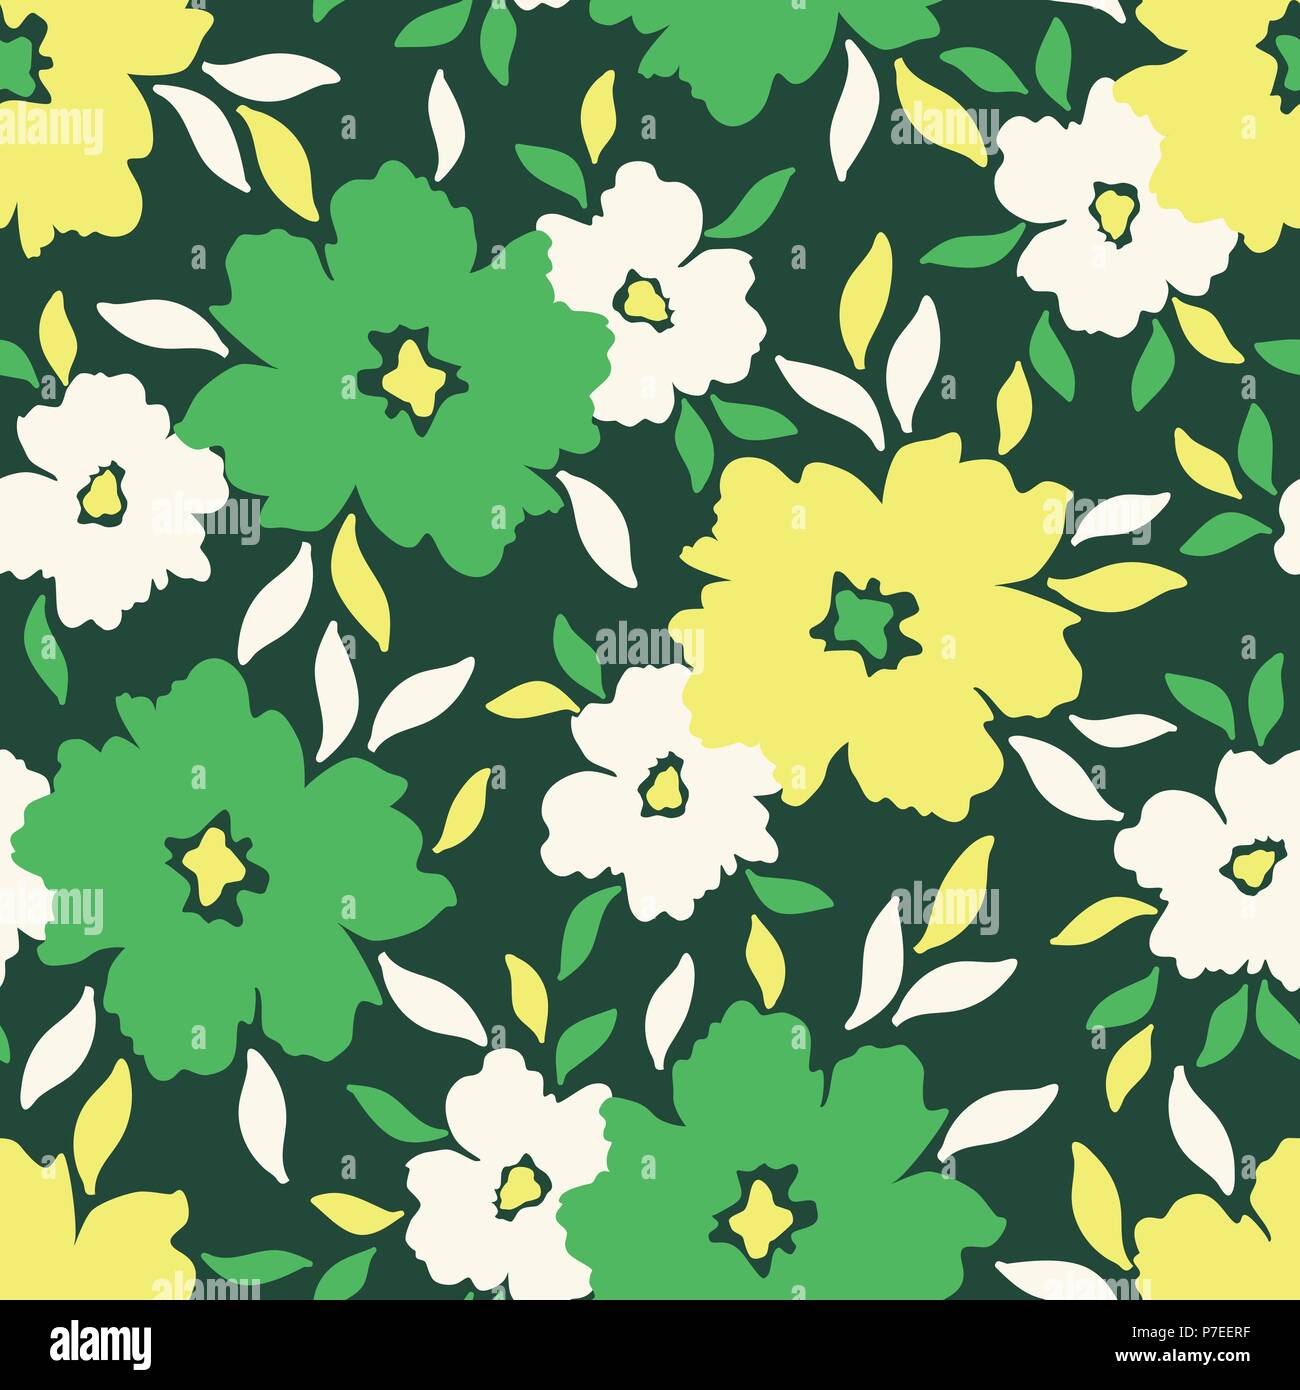 Colourful graphic large scale floral vector seamless pattern in green shades. Simplistic oversized hand drawn blooms scattered on emerald green backgr Stock Vector